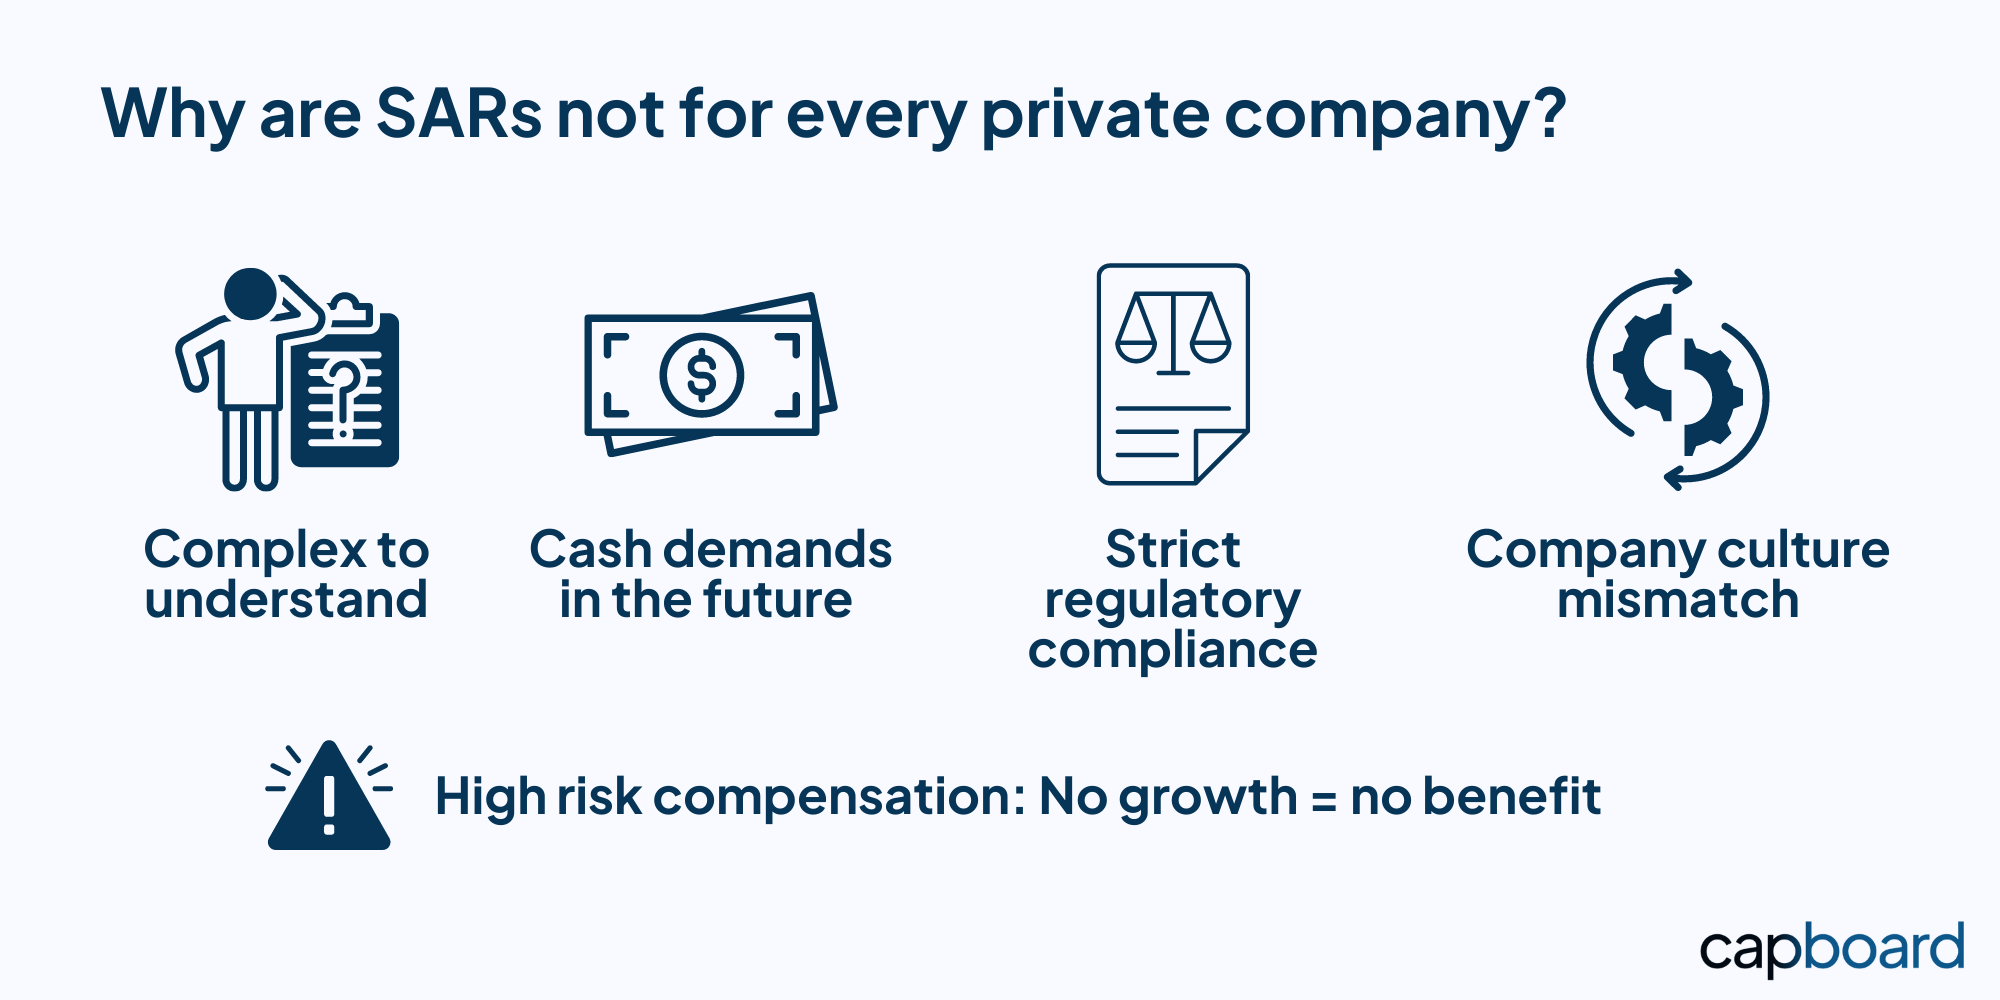 5 reasons why SARs plans are not for every private company.